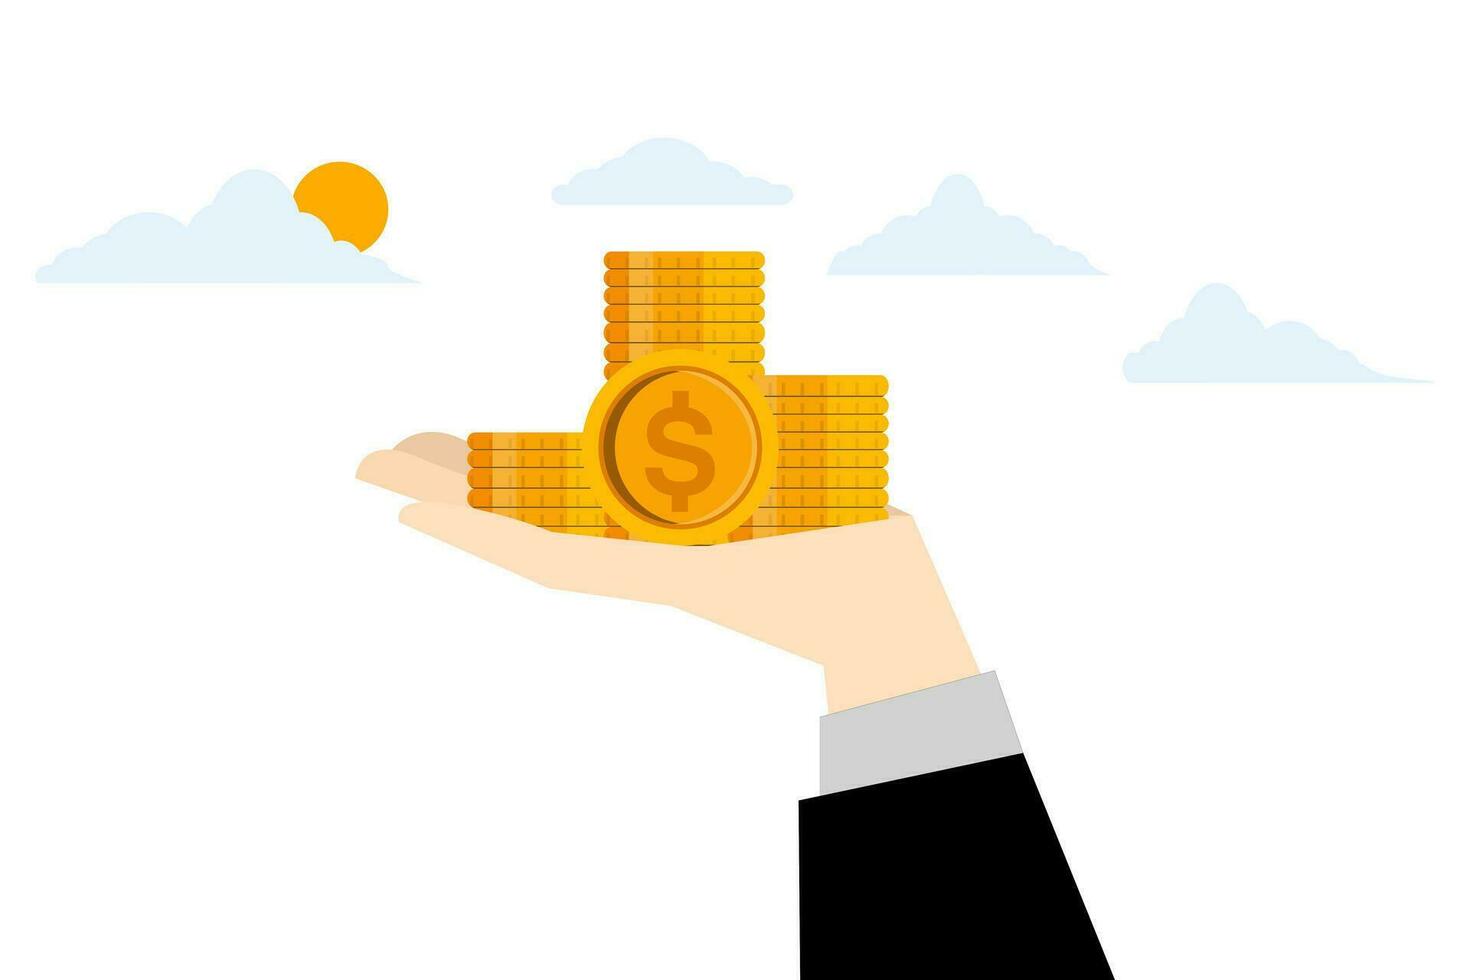 money holding gesture concept, Hand Holding Money business character, receiving coins and banknotes, income income and finance. flat vector illustration on white background.